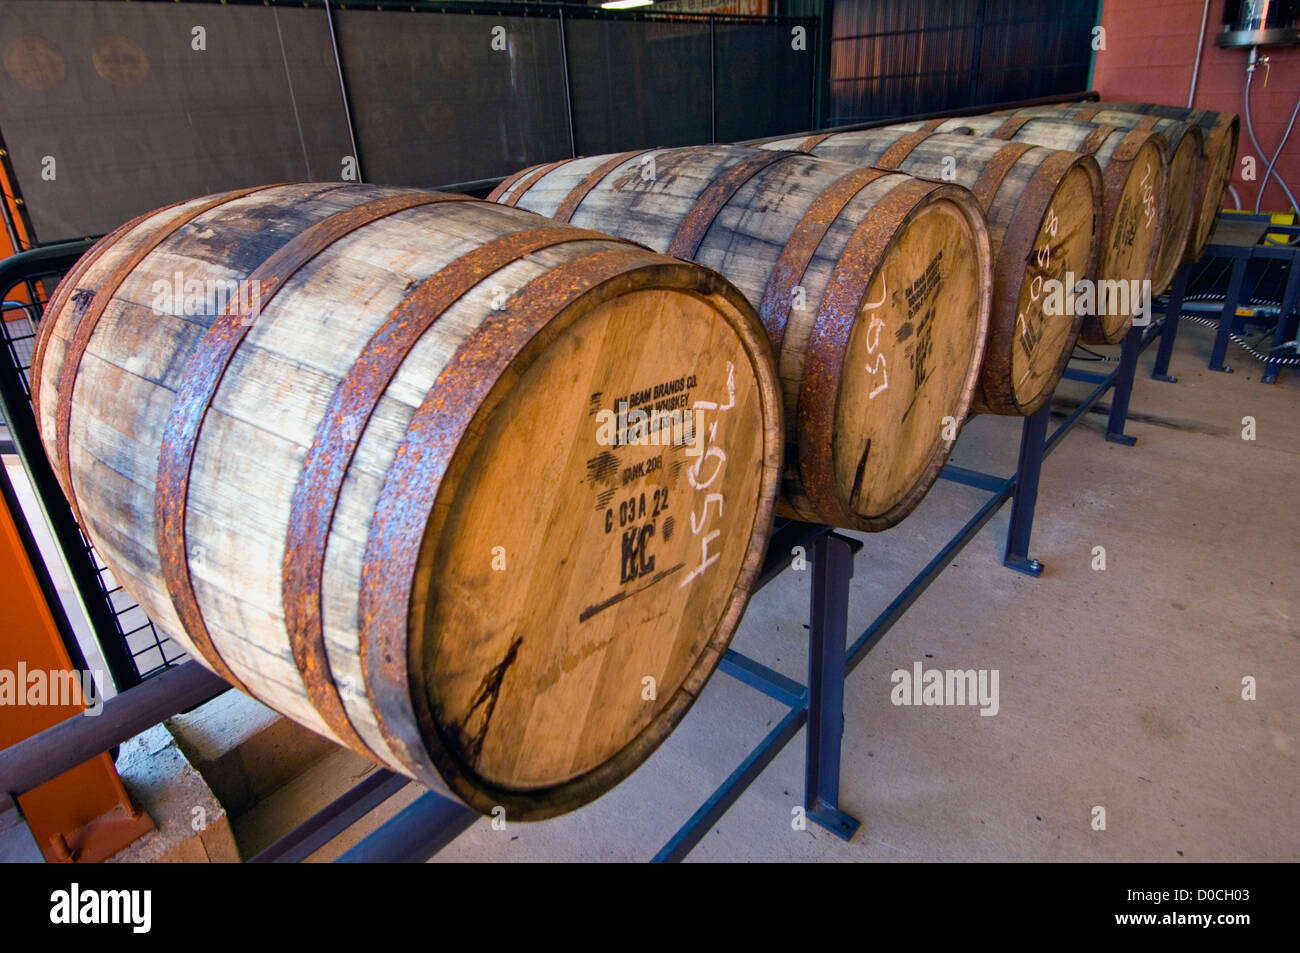 Barrels of Aged Knob Creek Bourbon Whiskey Ready to be Emptied at Jim Beam Distillery in Clermont, Kentucky Stock Photo